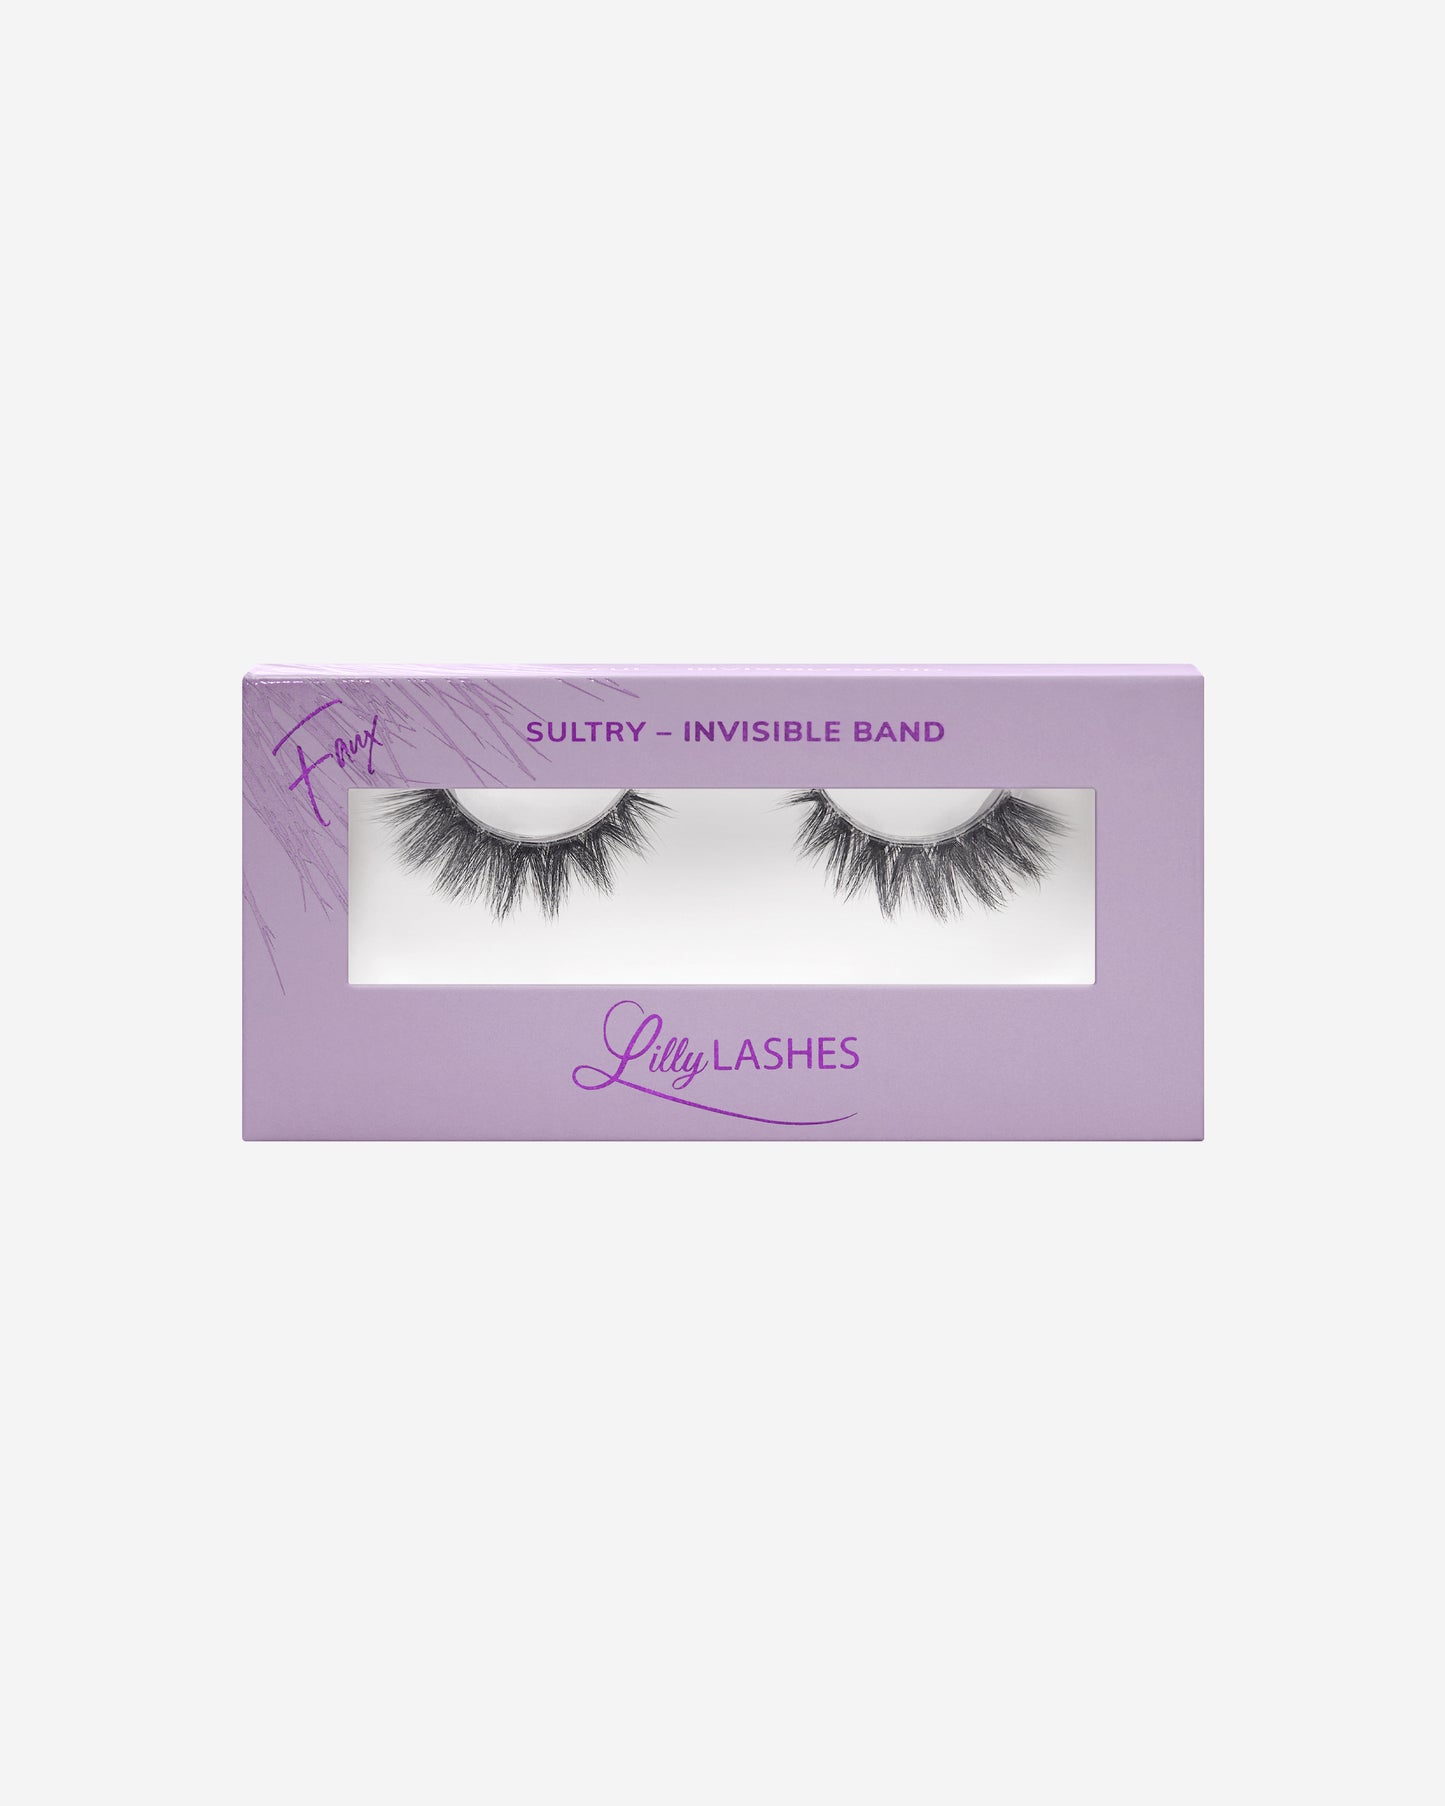 Lilly Lashes | Sheer Band | Sultry | Front of Box